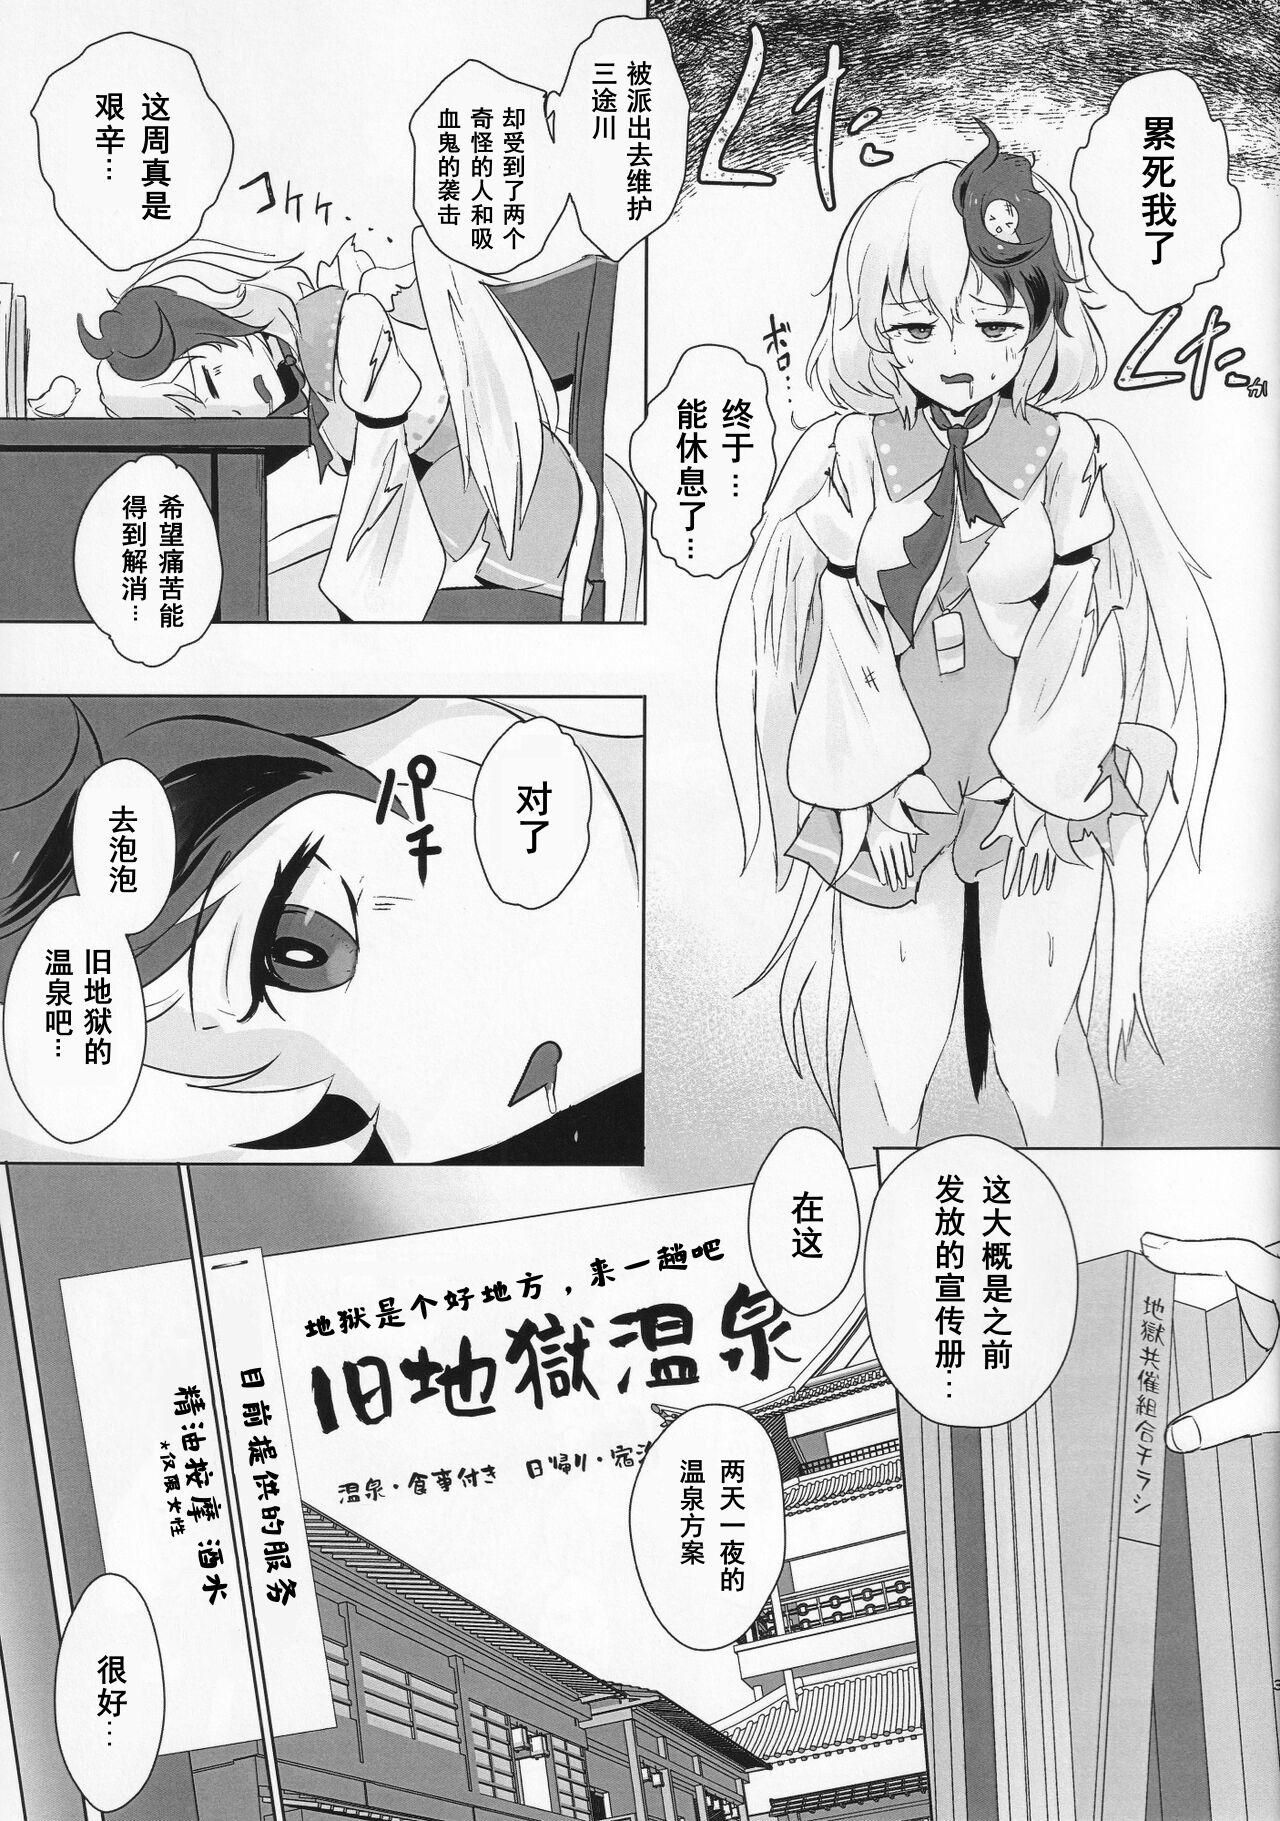 Newbie Momikomi Chicken - Touhou project Free 18 Year Old Porn - Page 2